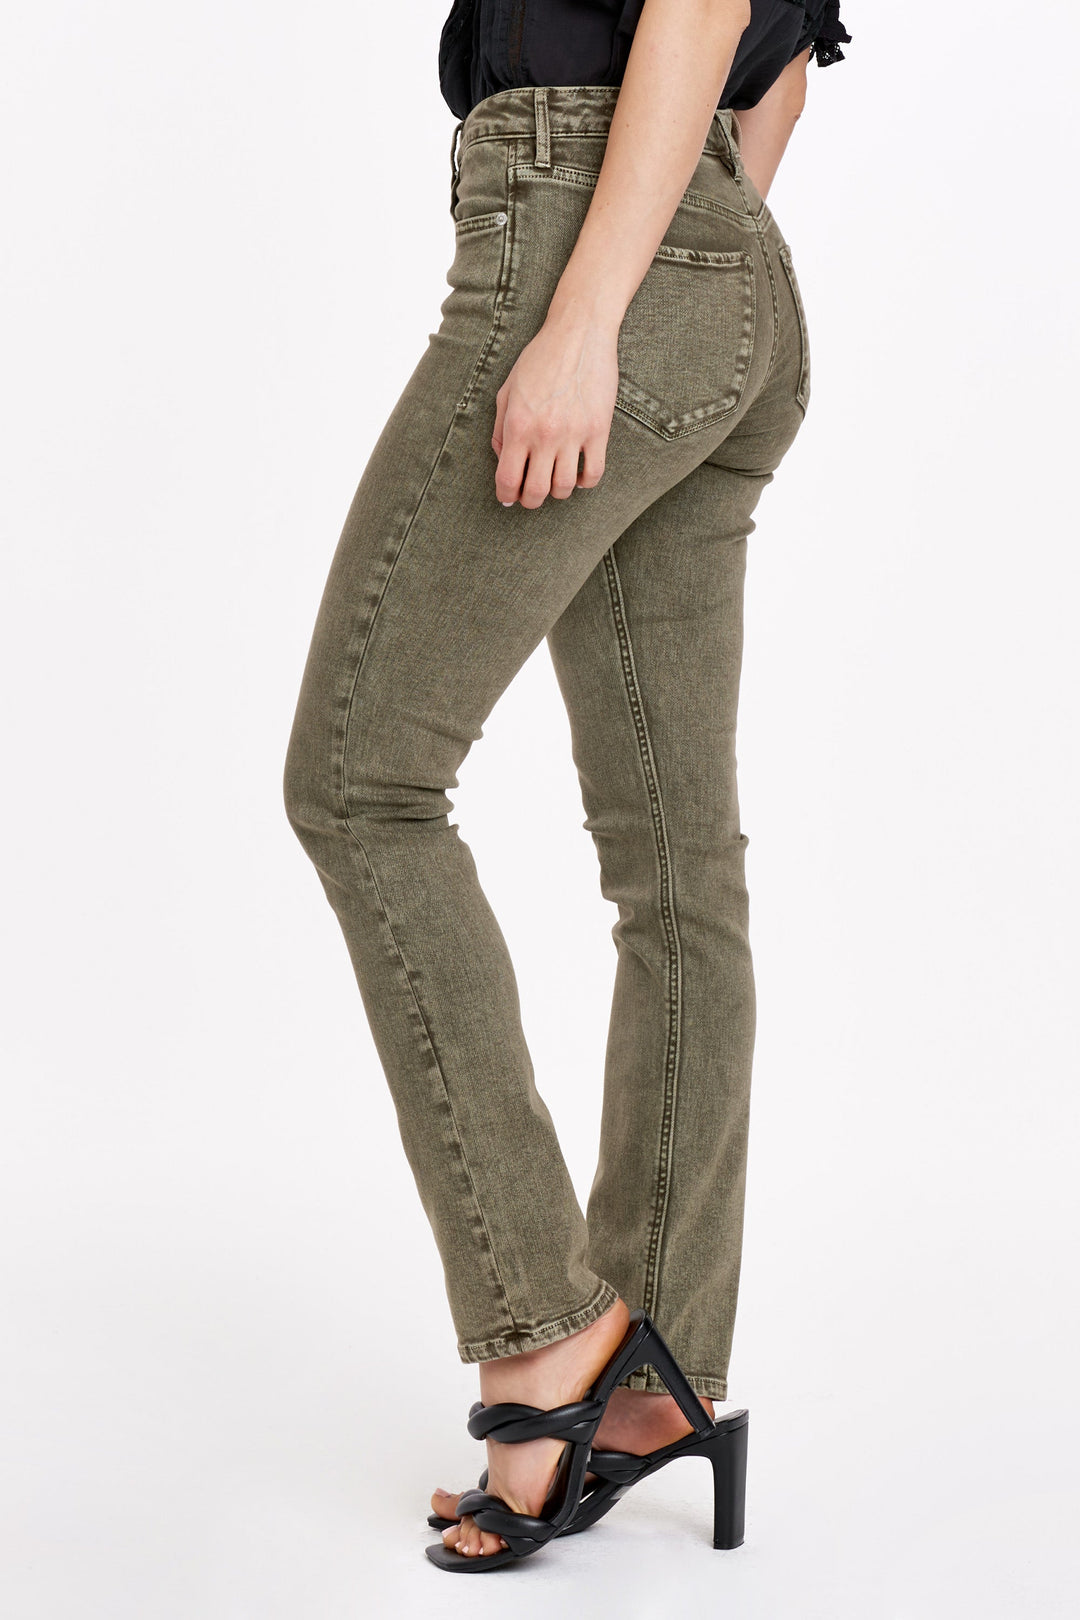 blaire-high-rise-slim-straight-jeans-olive